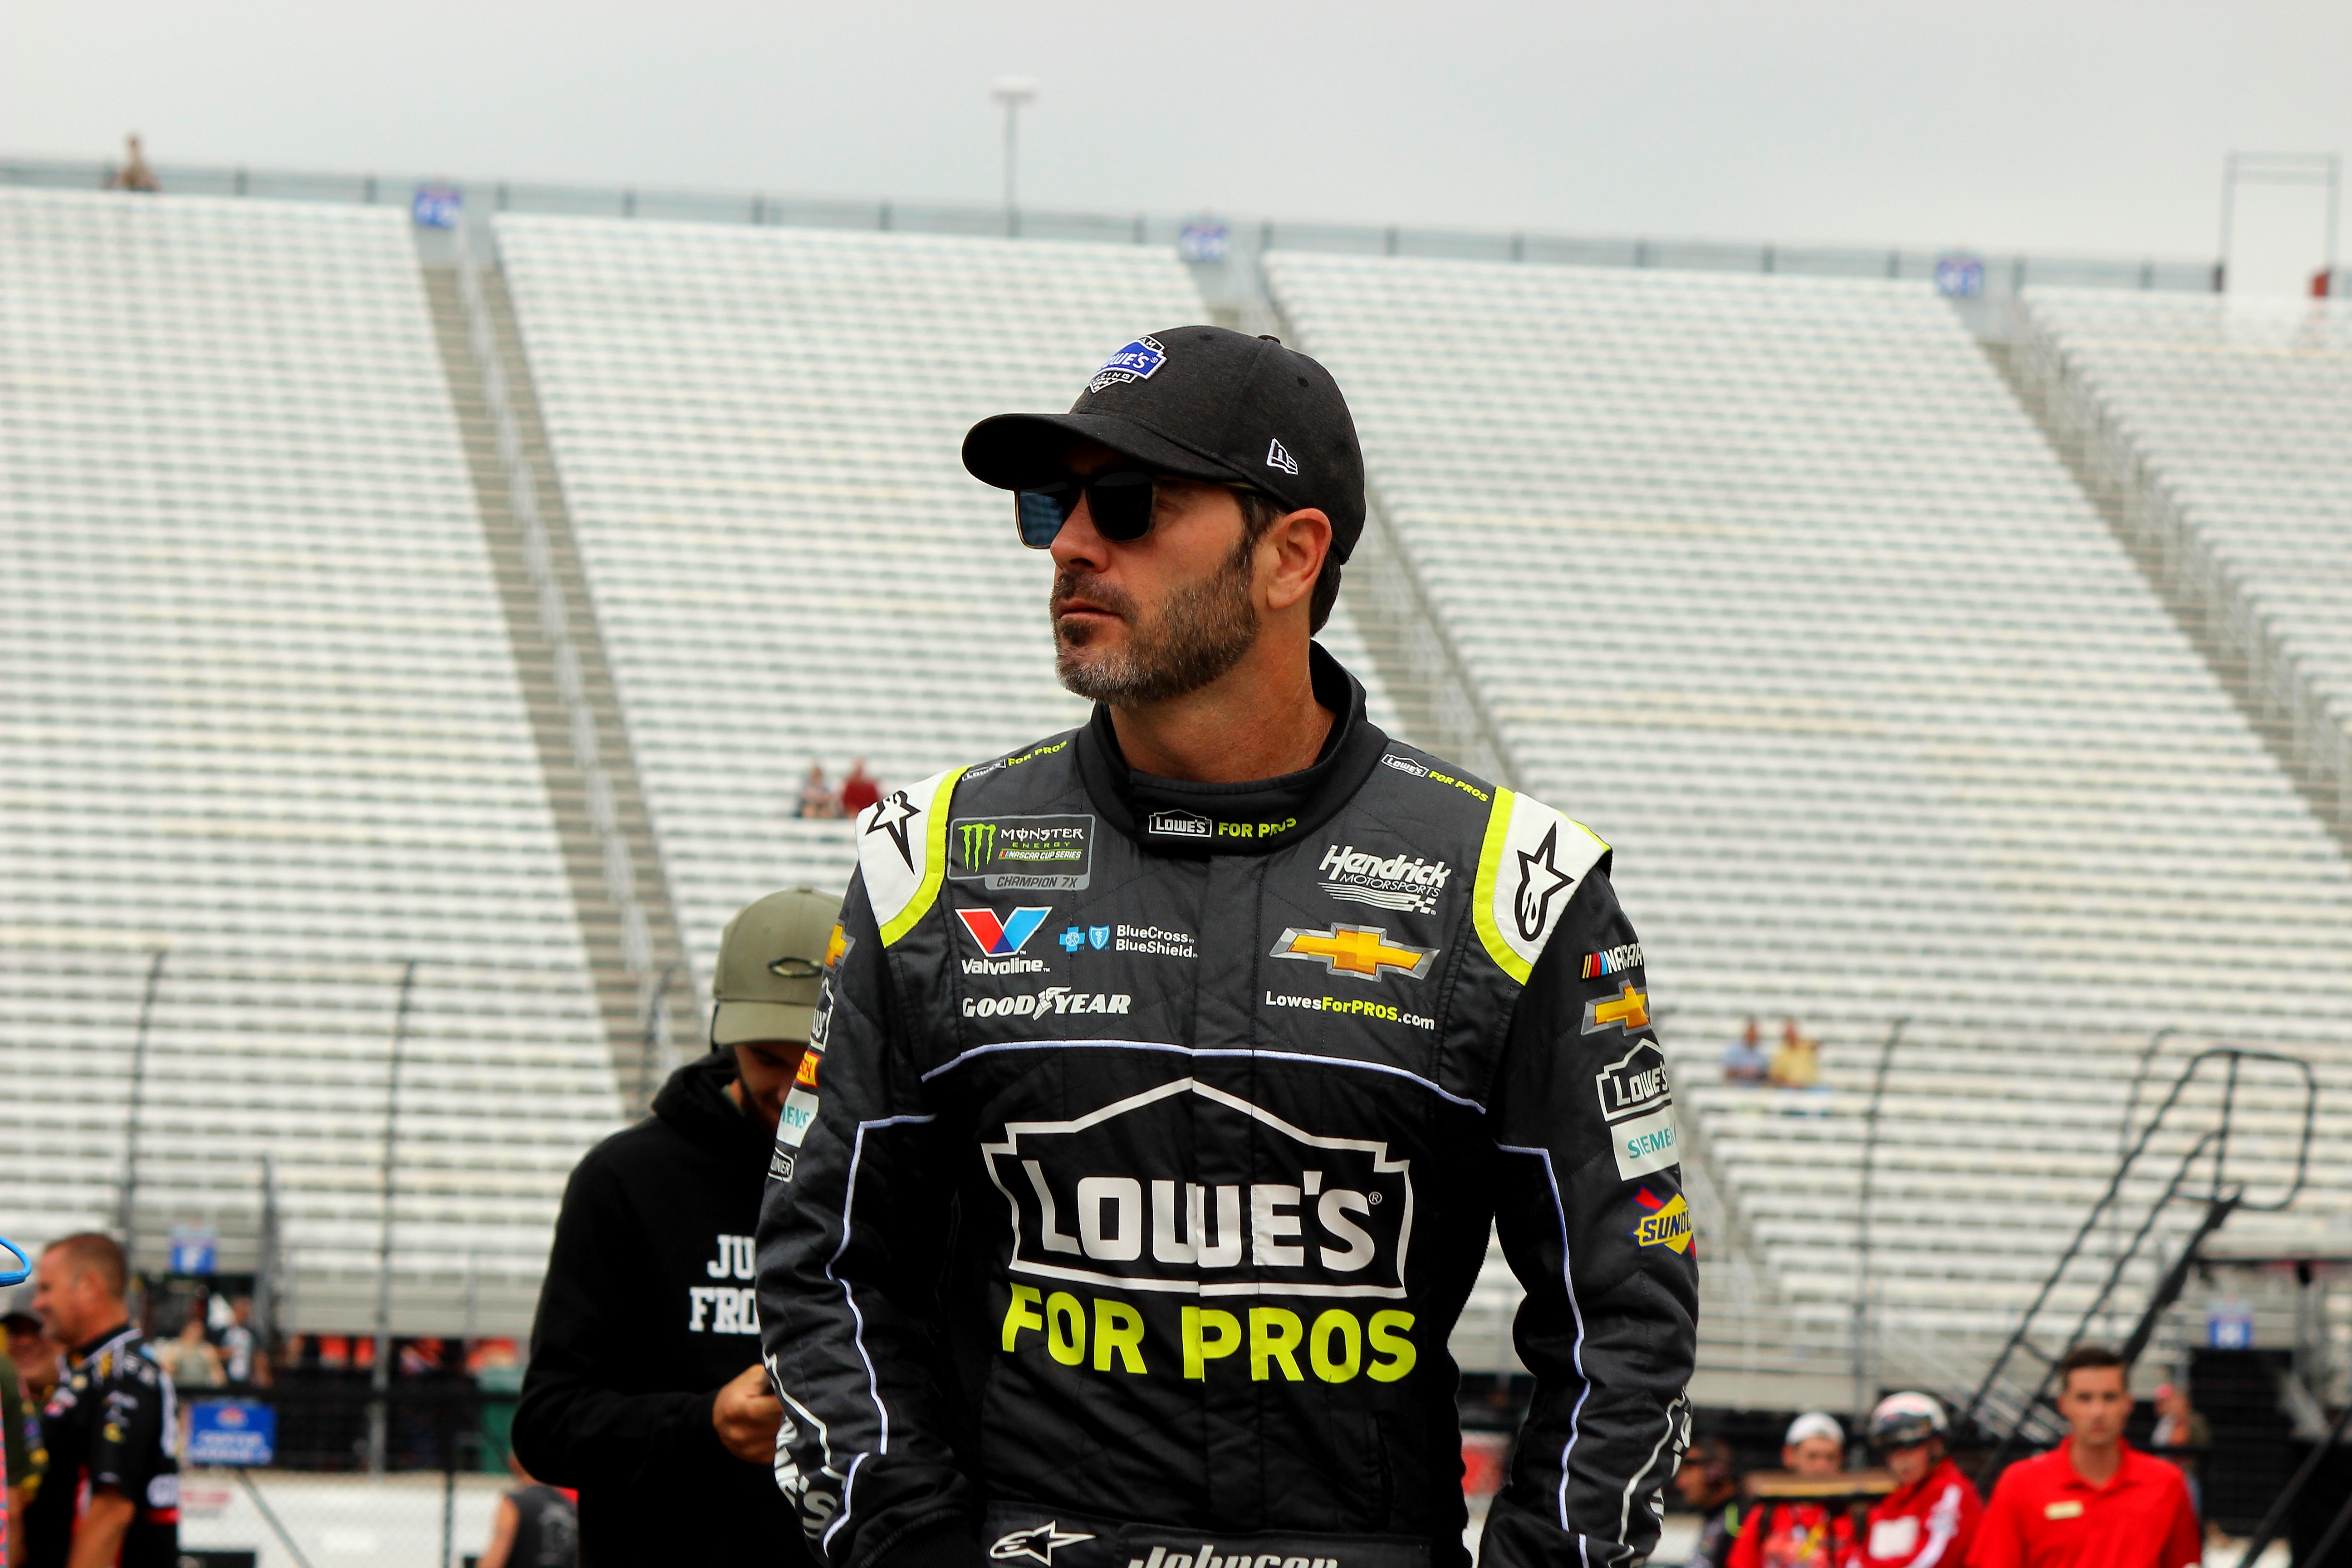 Jimmie Johnson may be like Jeff Lynne of ELO with his shades - his quest for excellence keeps him driven, just like the musician. (Photo Credit: Josh Jones/TPF)